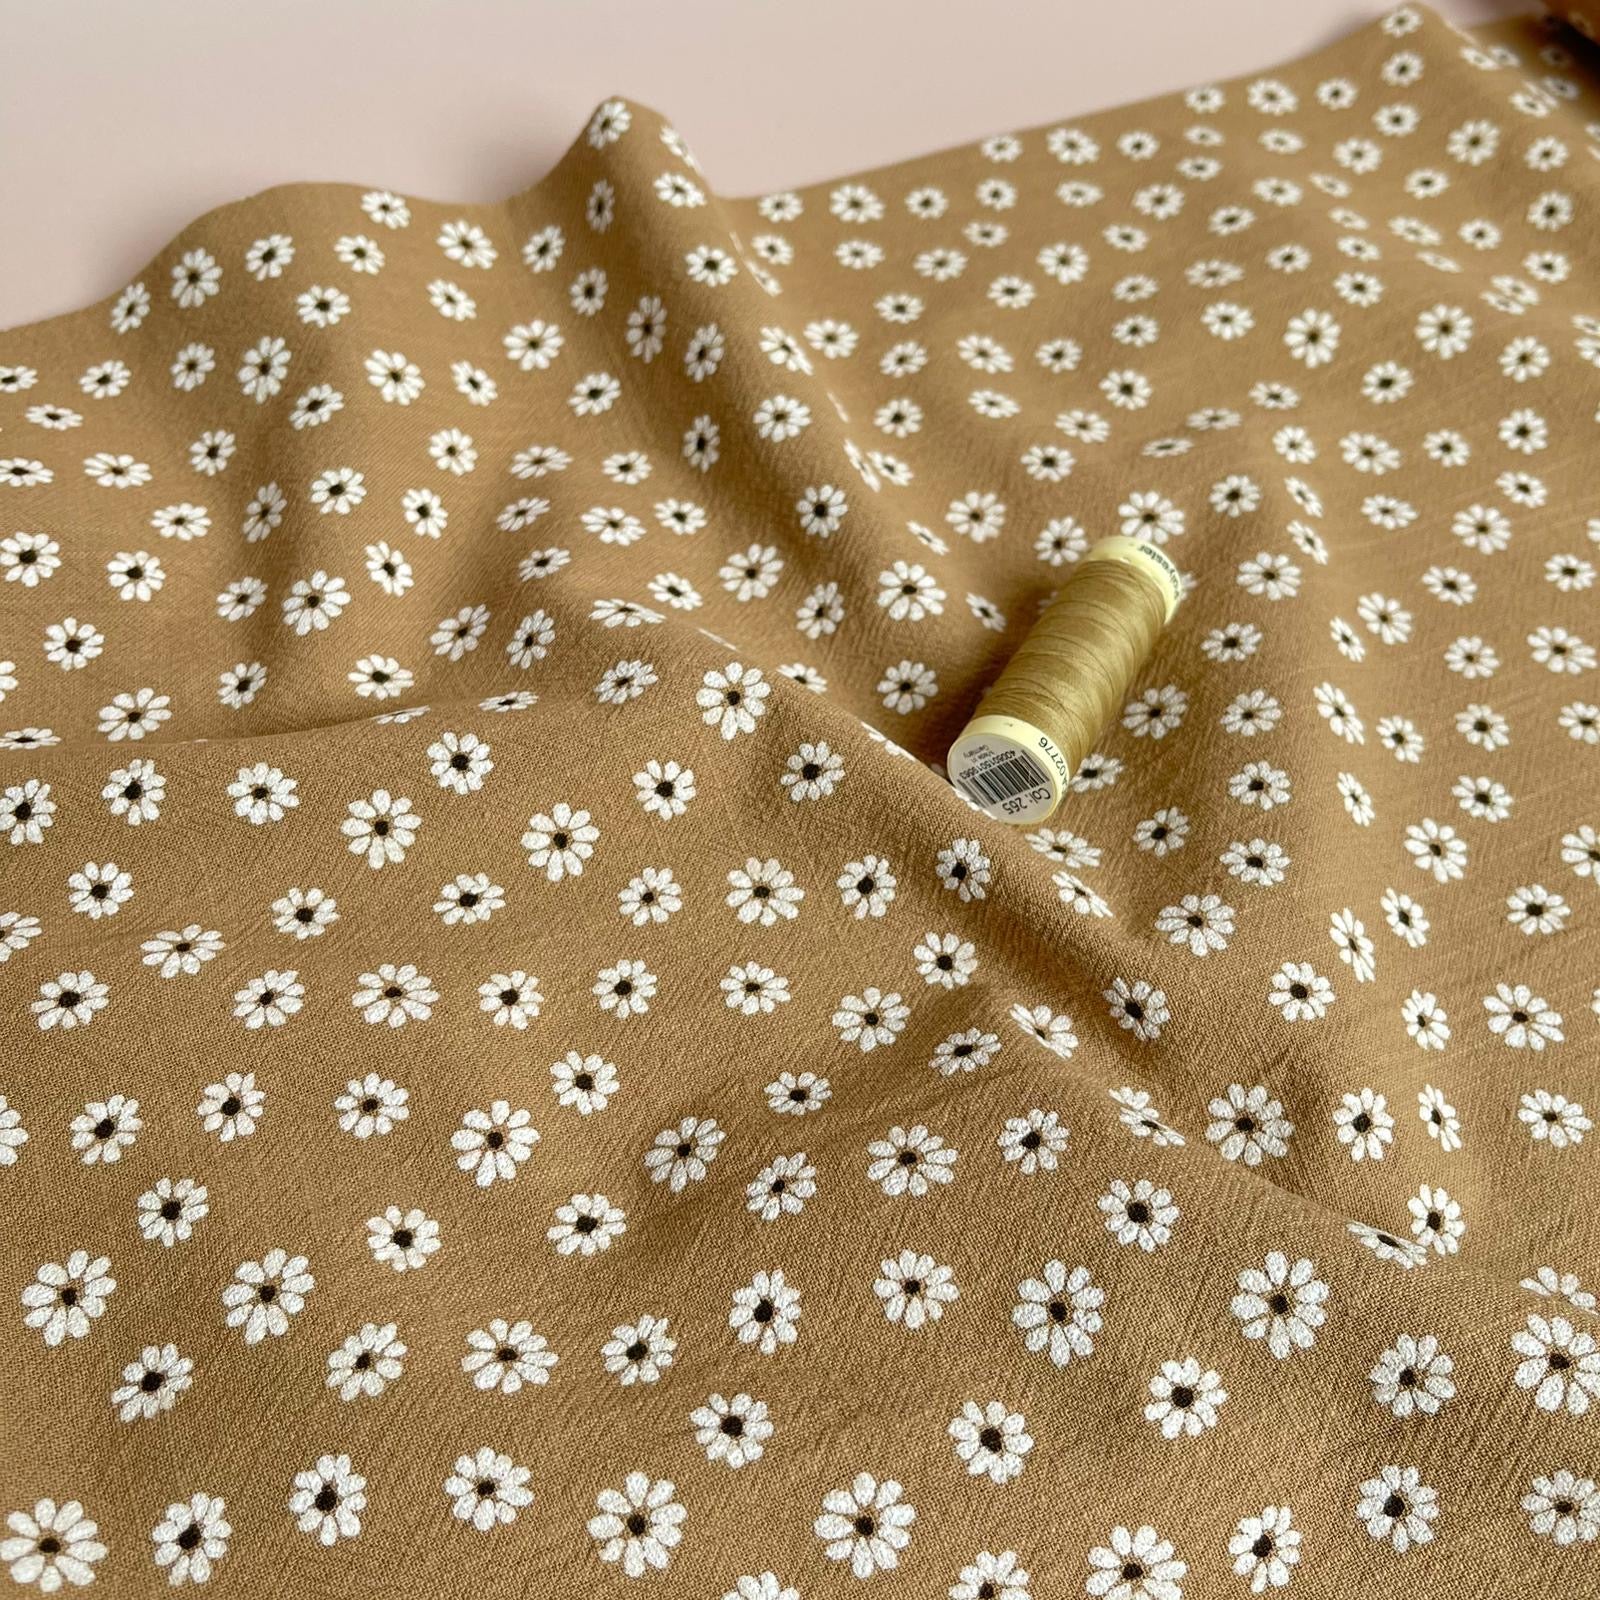 Vintage Daisy in Beige Washed Cotton